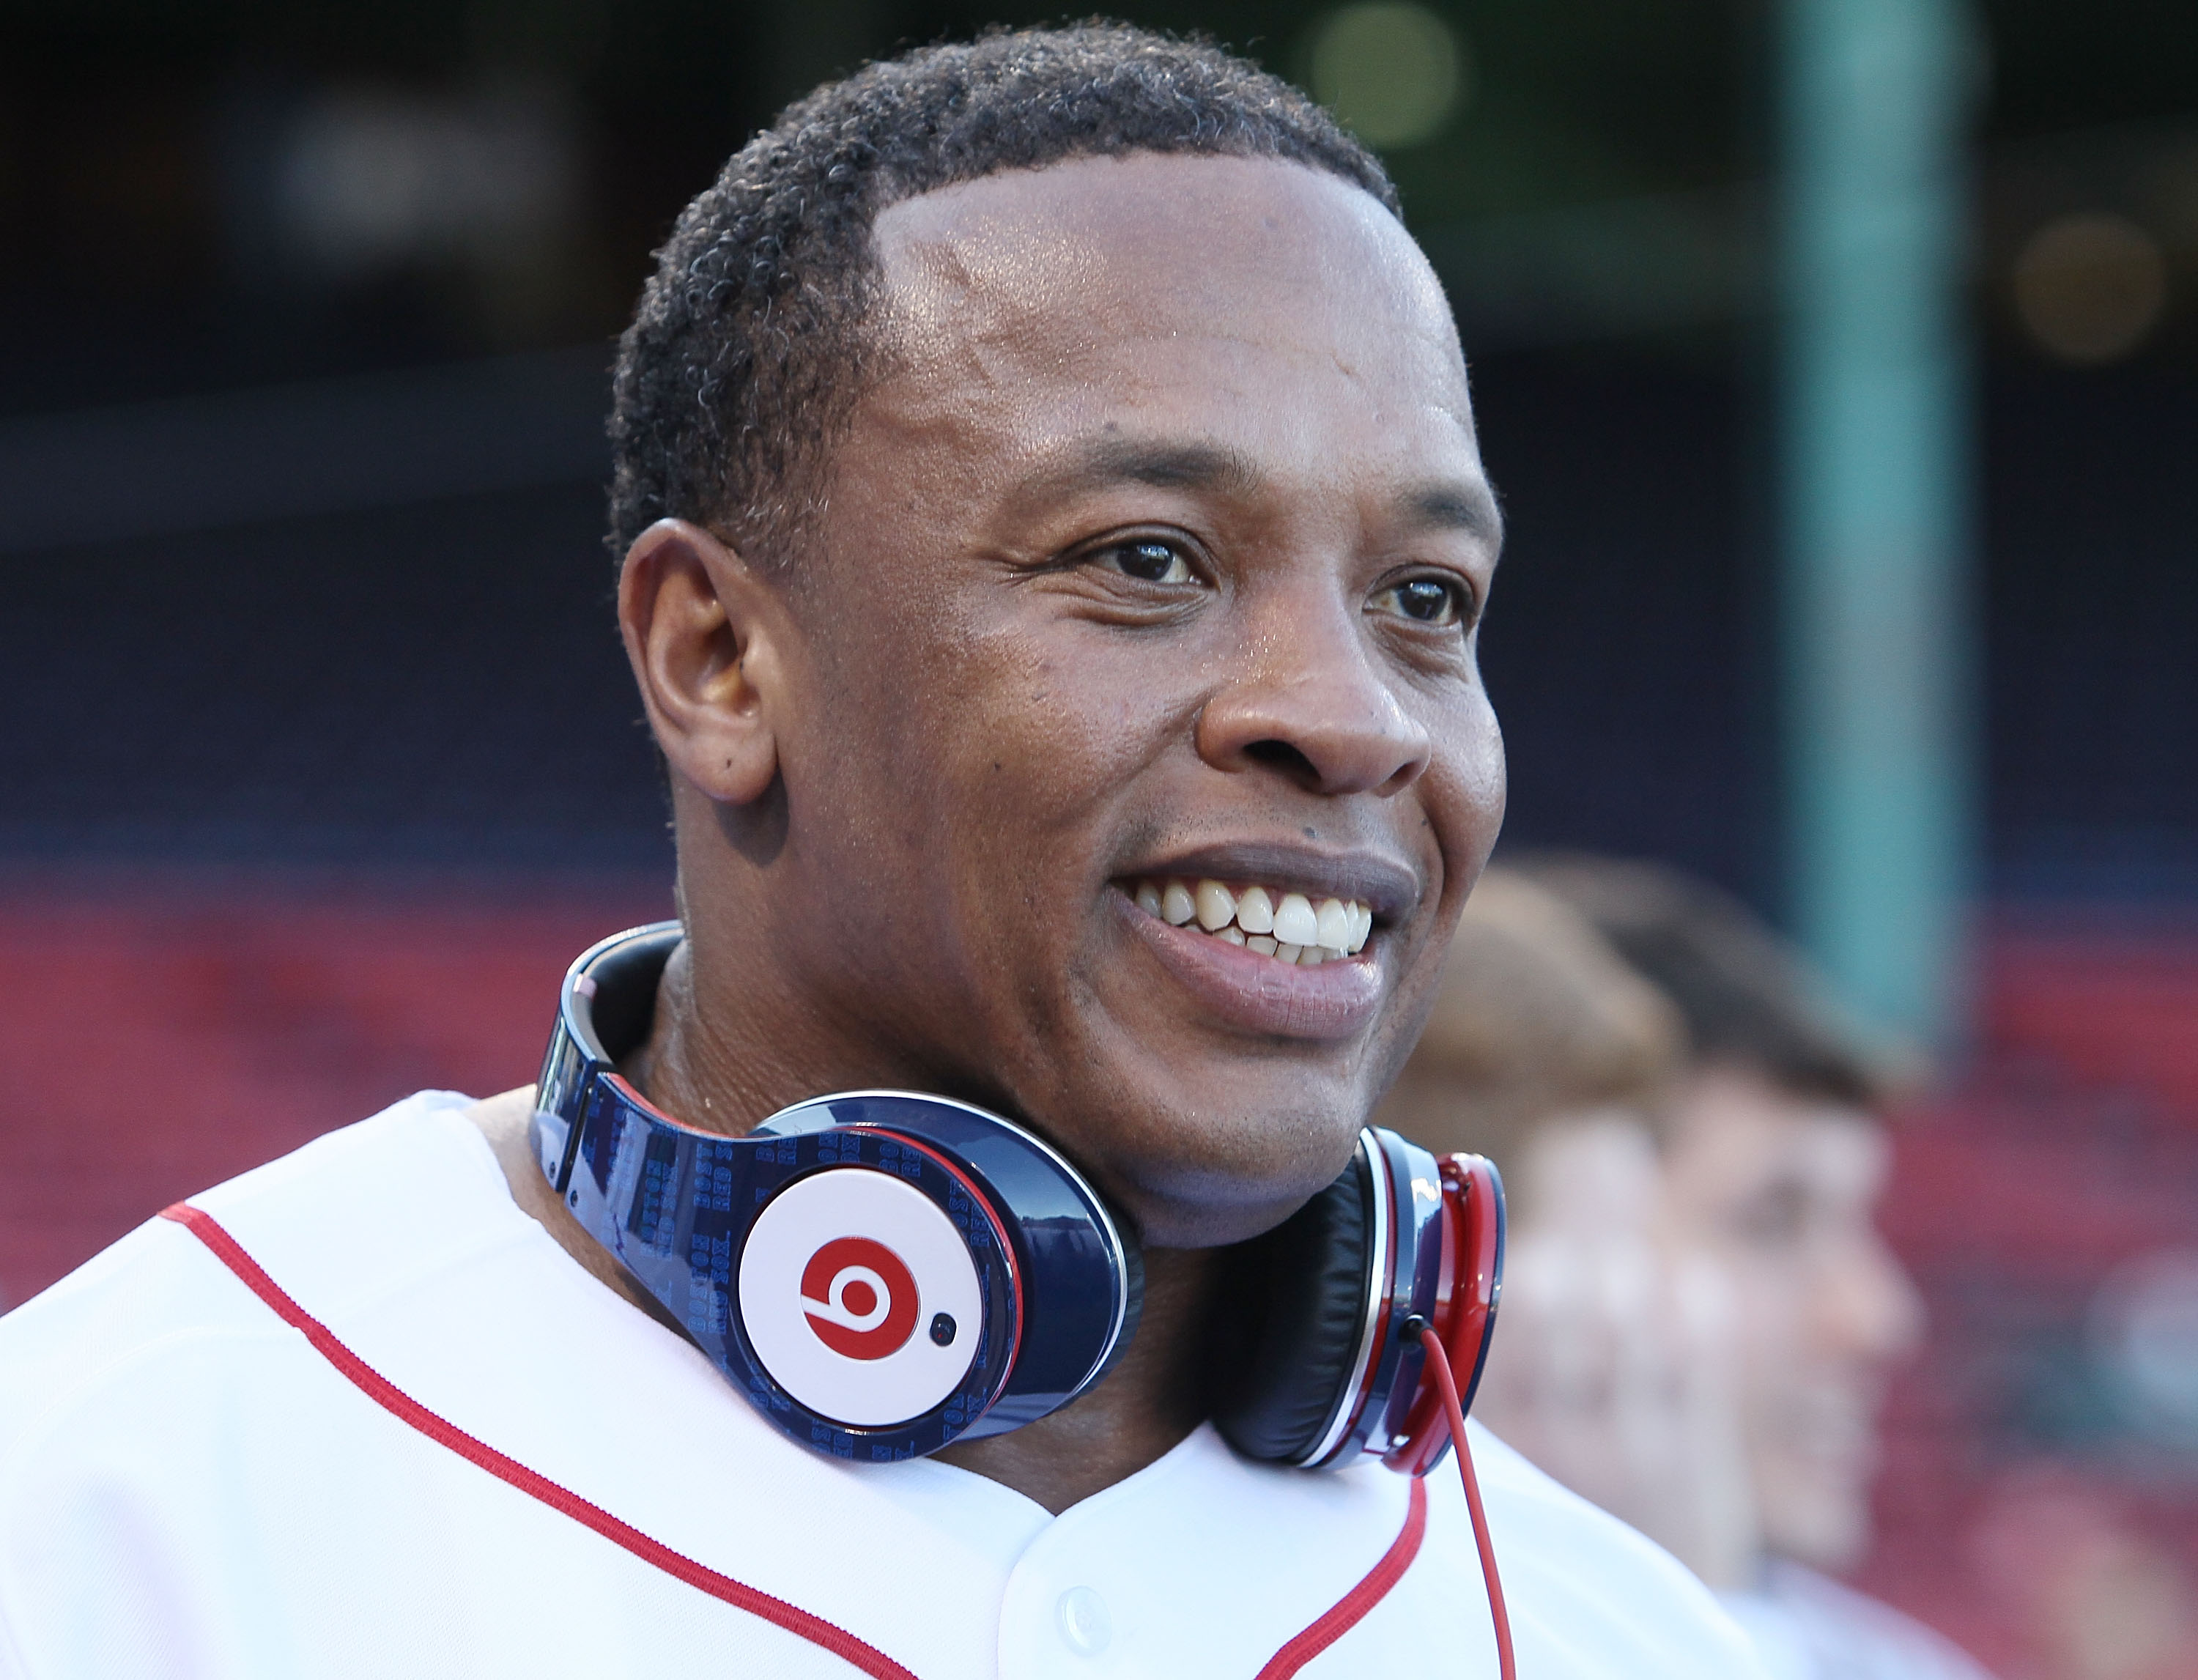 Producer and musician Dr. Dre is on the field before the Boston Red Sox take on the the New York Yankees on April 4, 2010. (Elsa&mdash;Getty Images)